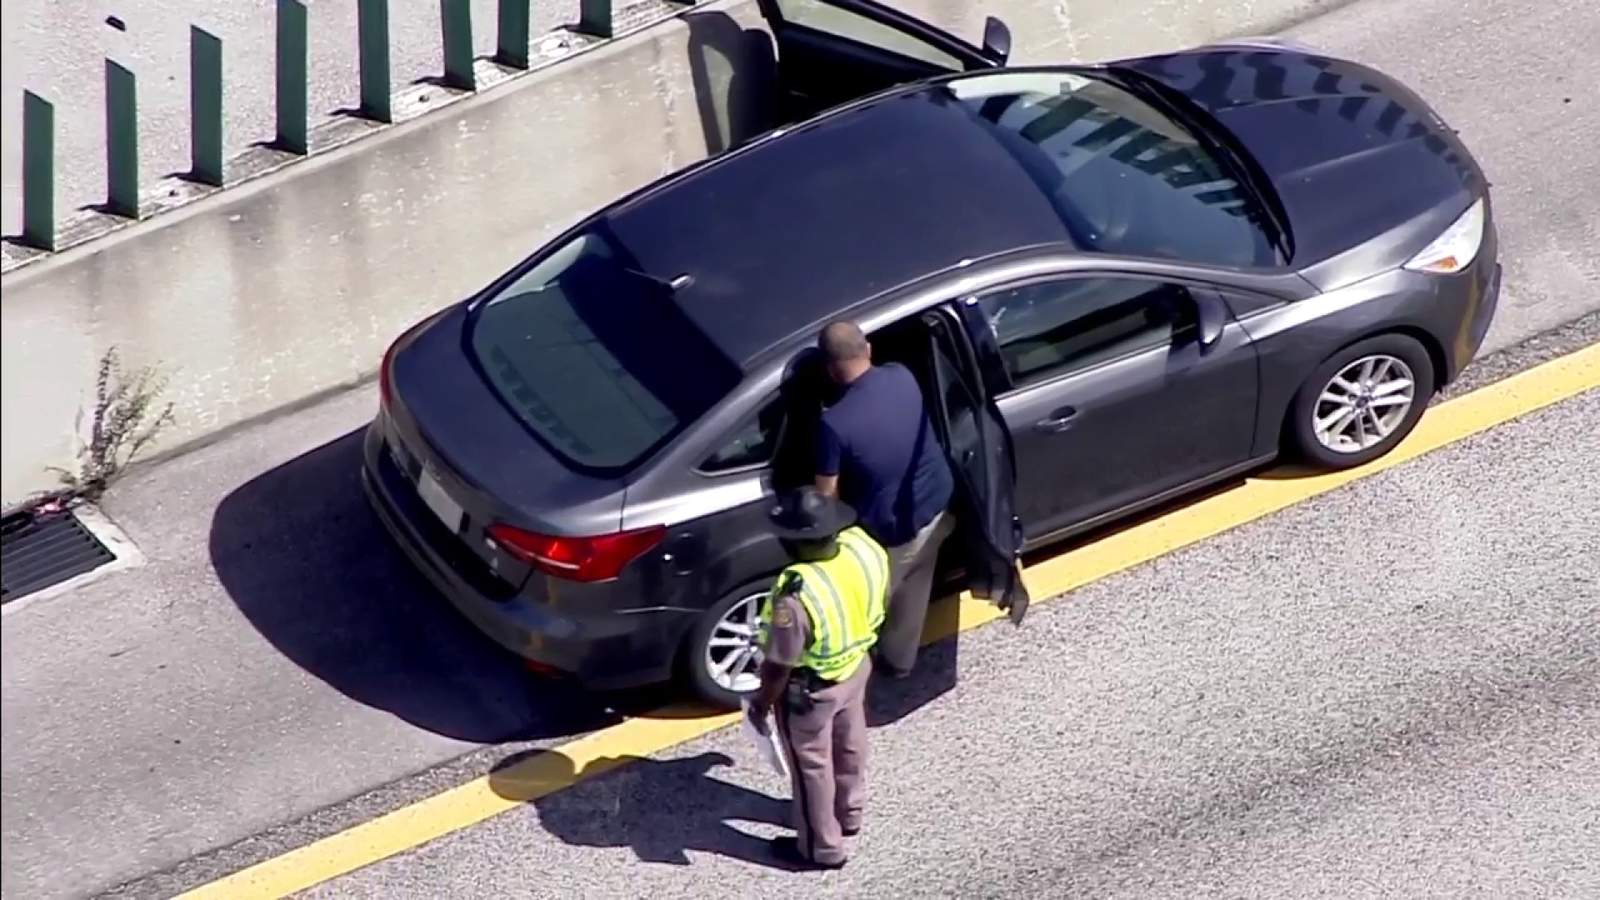 Shooter on the loose after I-95 road rage incident near Broward-Dade line